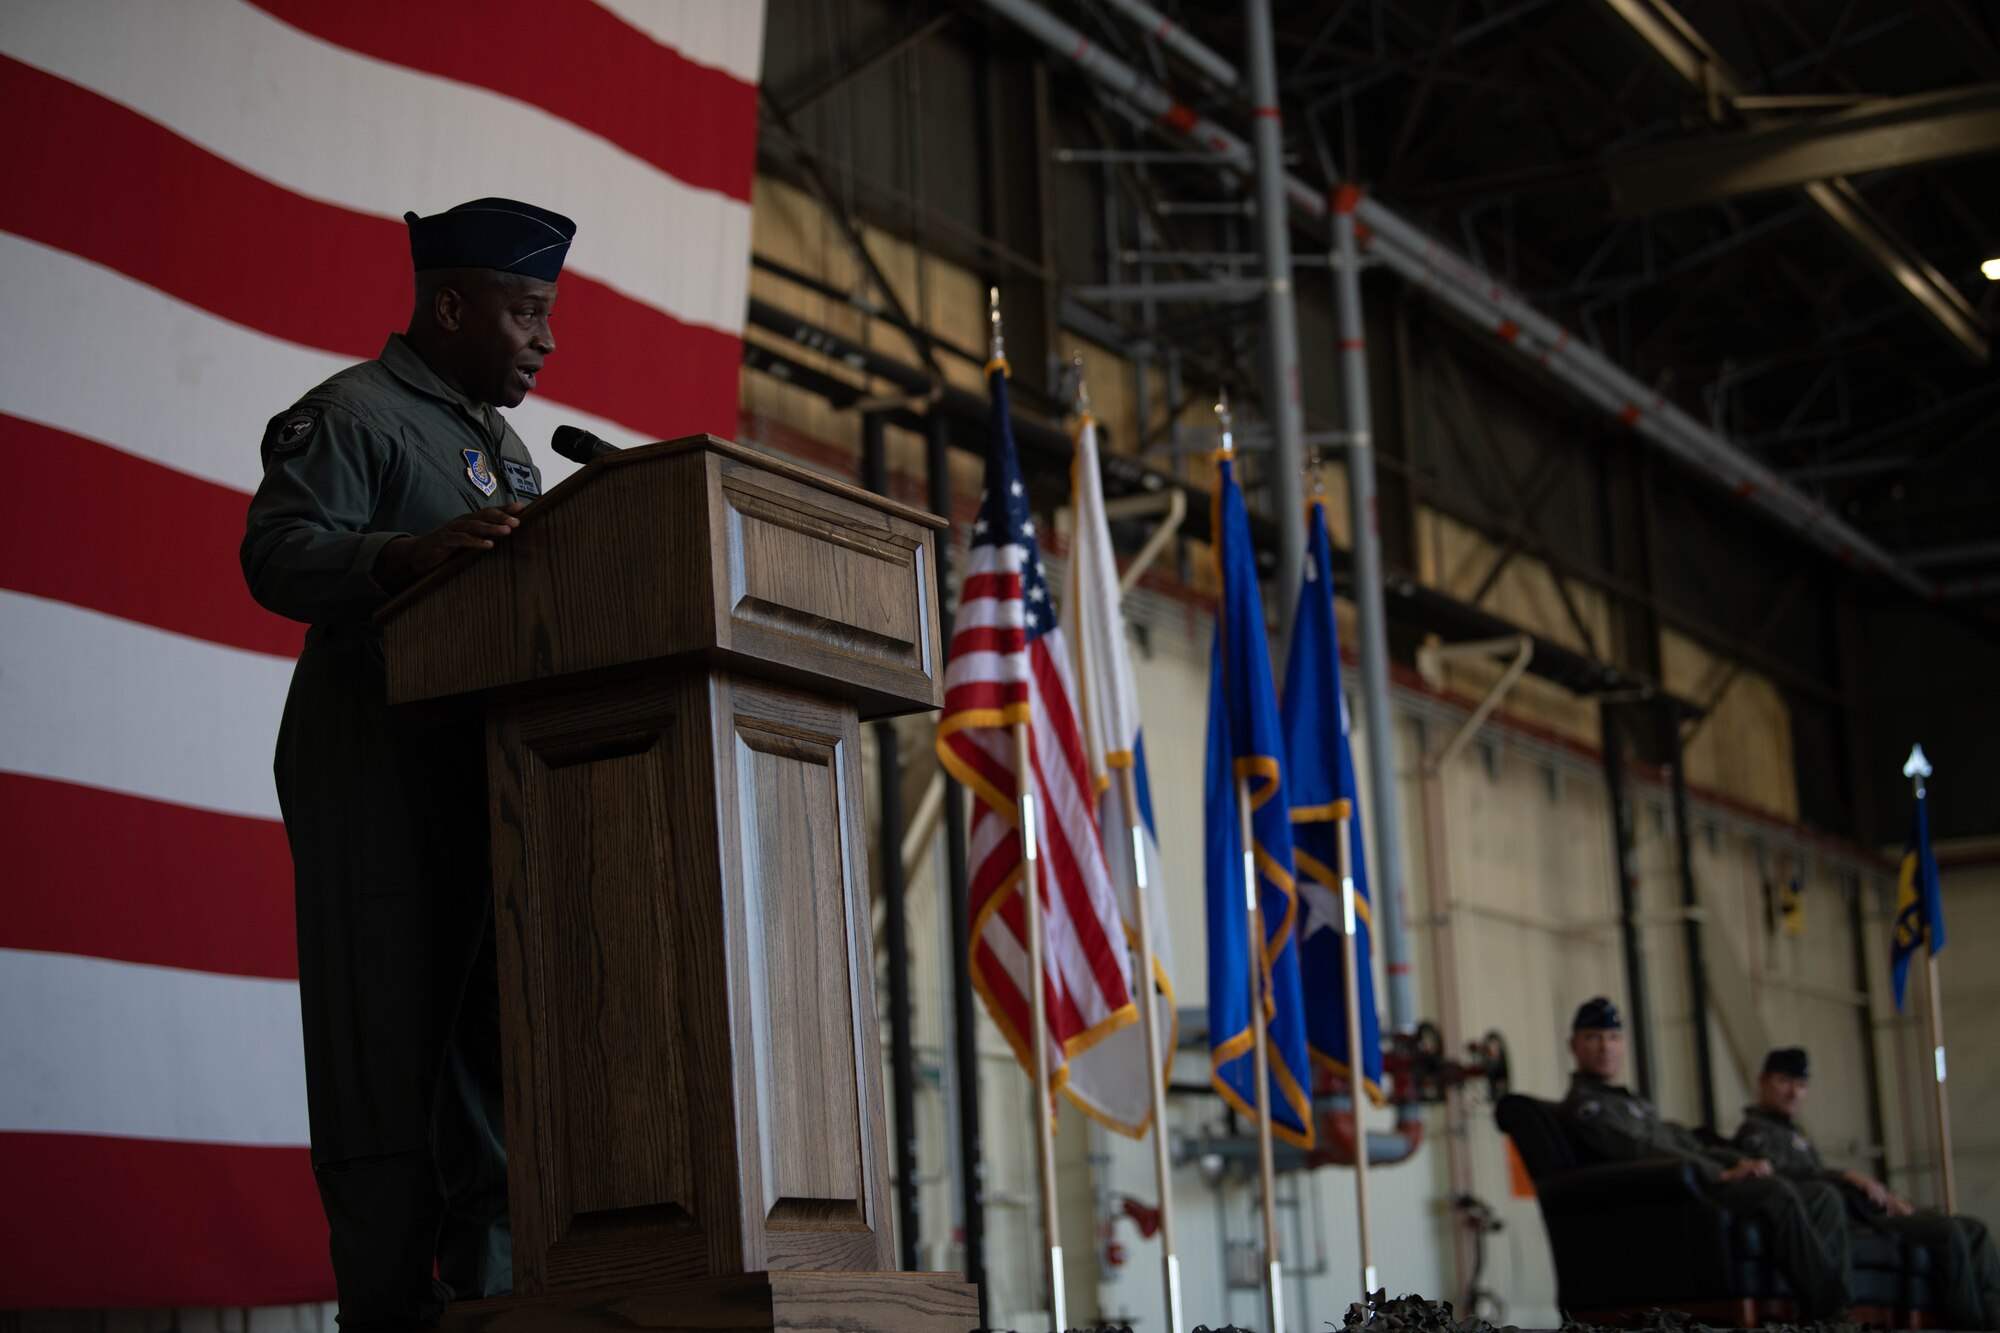 Col. Henry R. Jeffress, III, 8th Fighter Wing incoming commander, speaks during the wing change of command ceremony at Kunsan Air Base, Republic of Korea, May 26, 2022. Jeffress, or Wolf 62, assumed command of the 8th FW from the outgoing commander, Col. John B. Gallemore.  (U.S. Air Force Photo by Senior Airman Shannon Braaten)